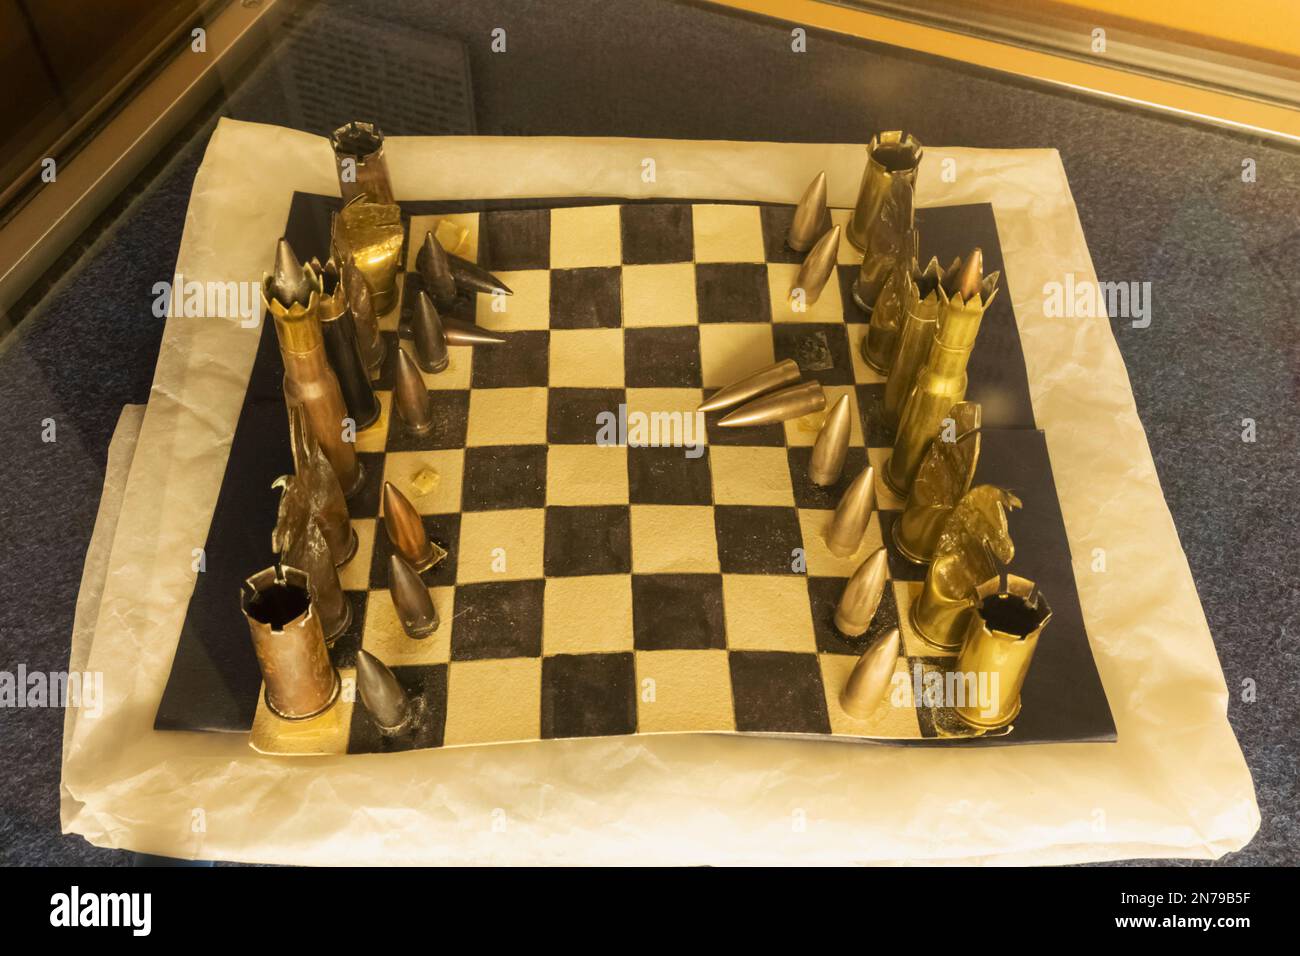 Johan Wahlstrom, A Game Of Chess No.5 (2023), Available for Sale